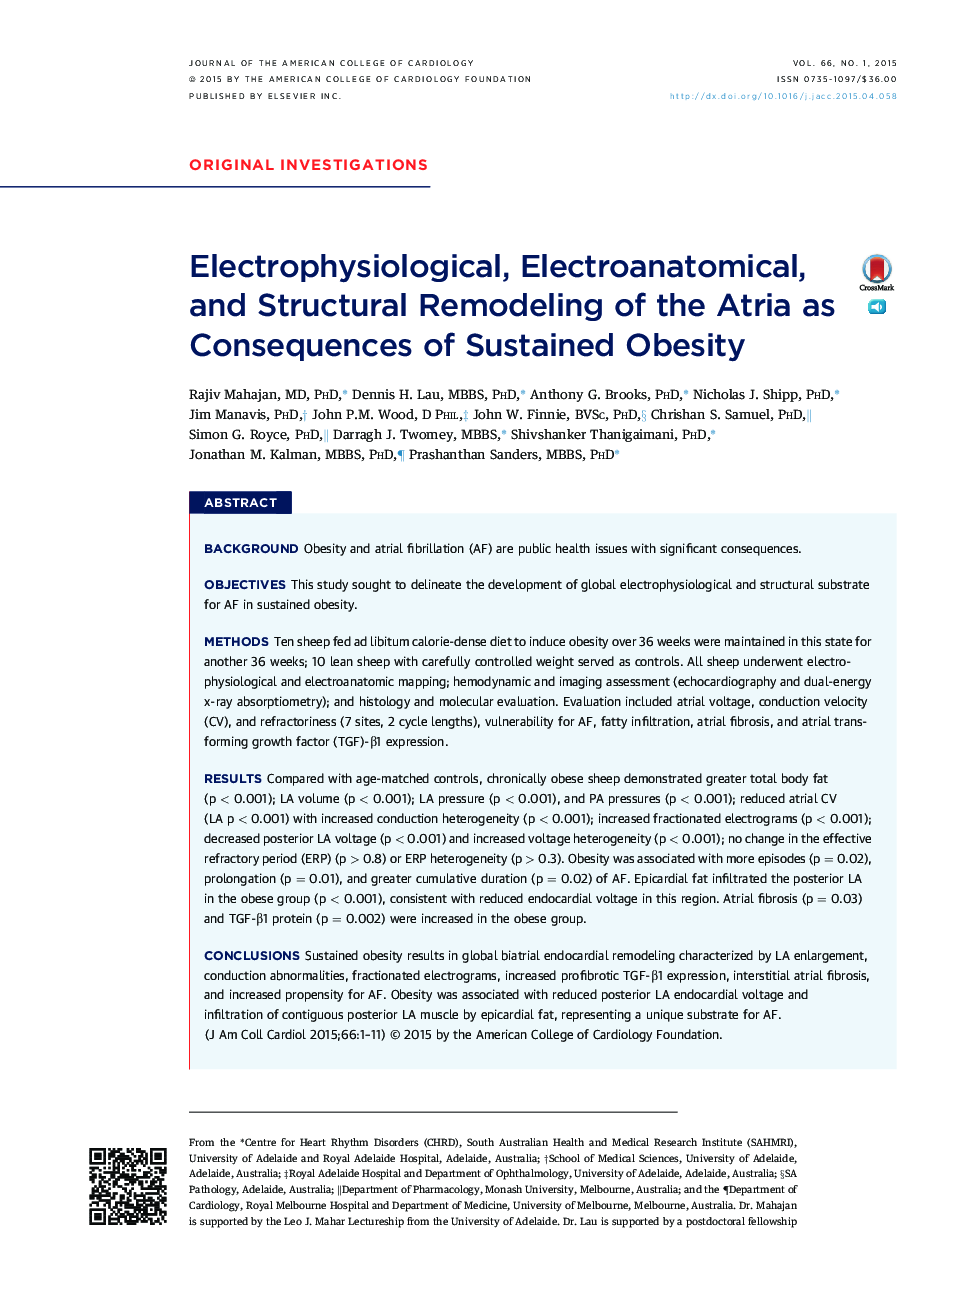 Electrophysiological, Electroanatomical, and Structural Remodeling of the Atria as Consequences of Sustained Obesity 